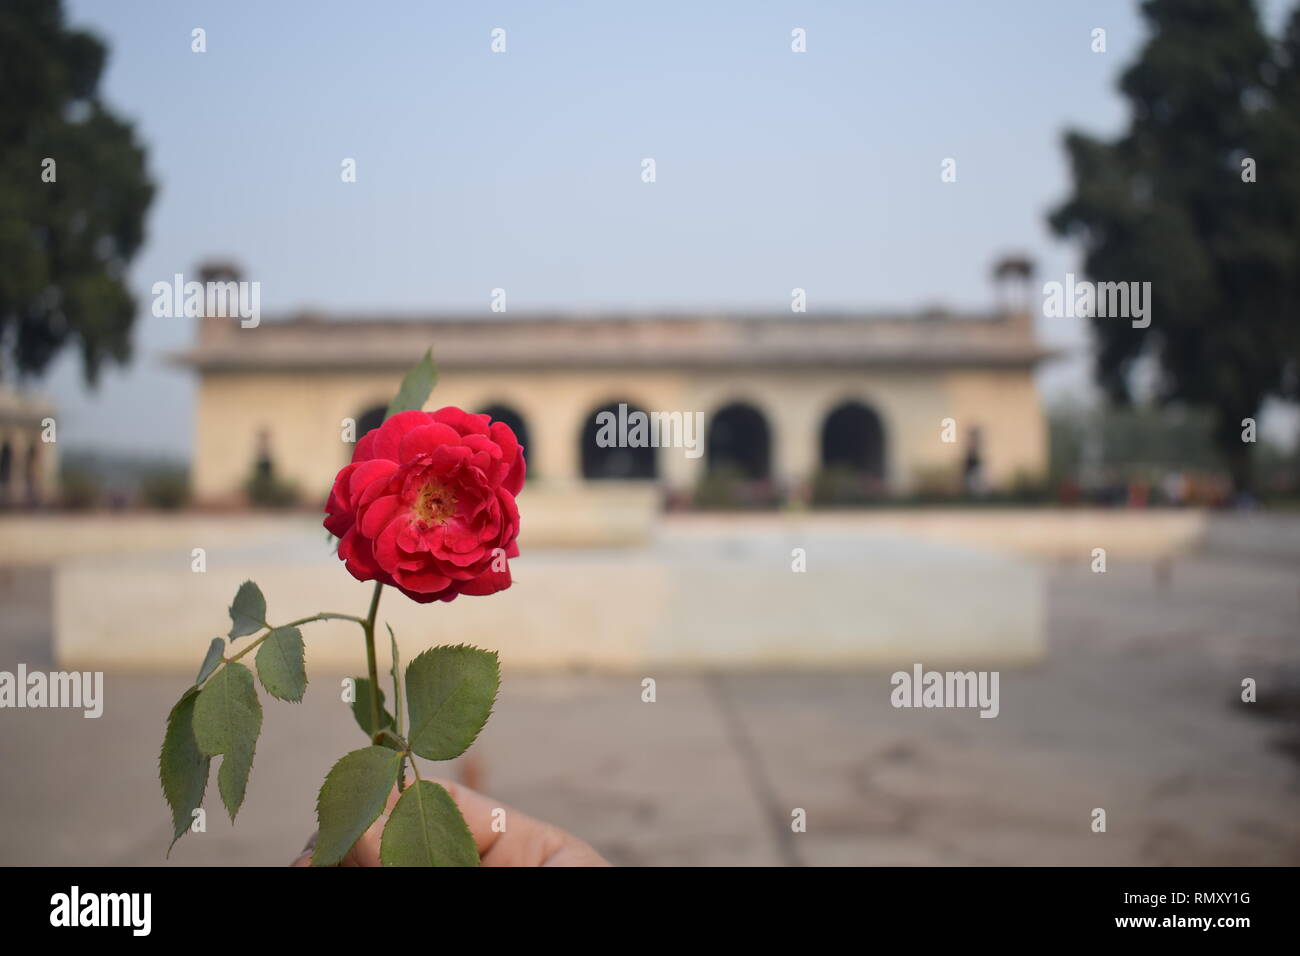 this is the high-resolution image of Red Fort situated in Delhi, India, with a rose flower in front of it.it is a historical monument built by Shahjahan. Stock Photo